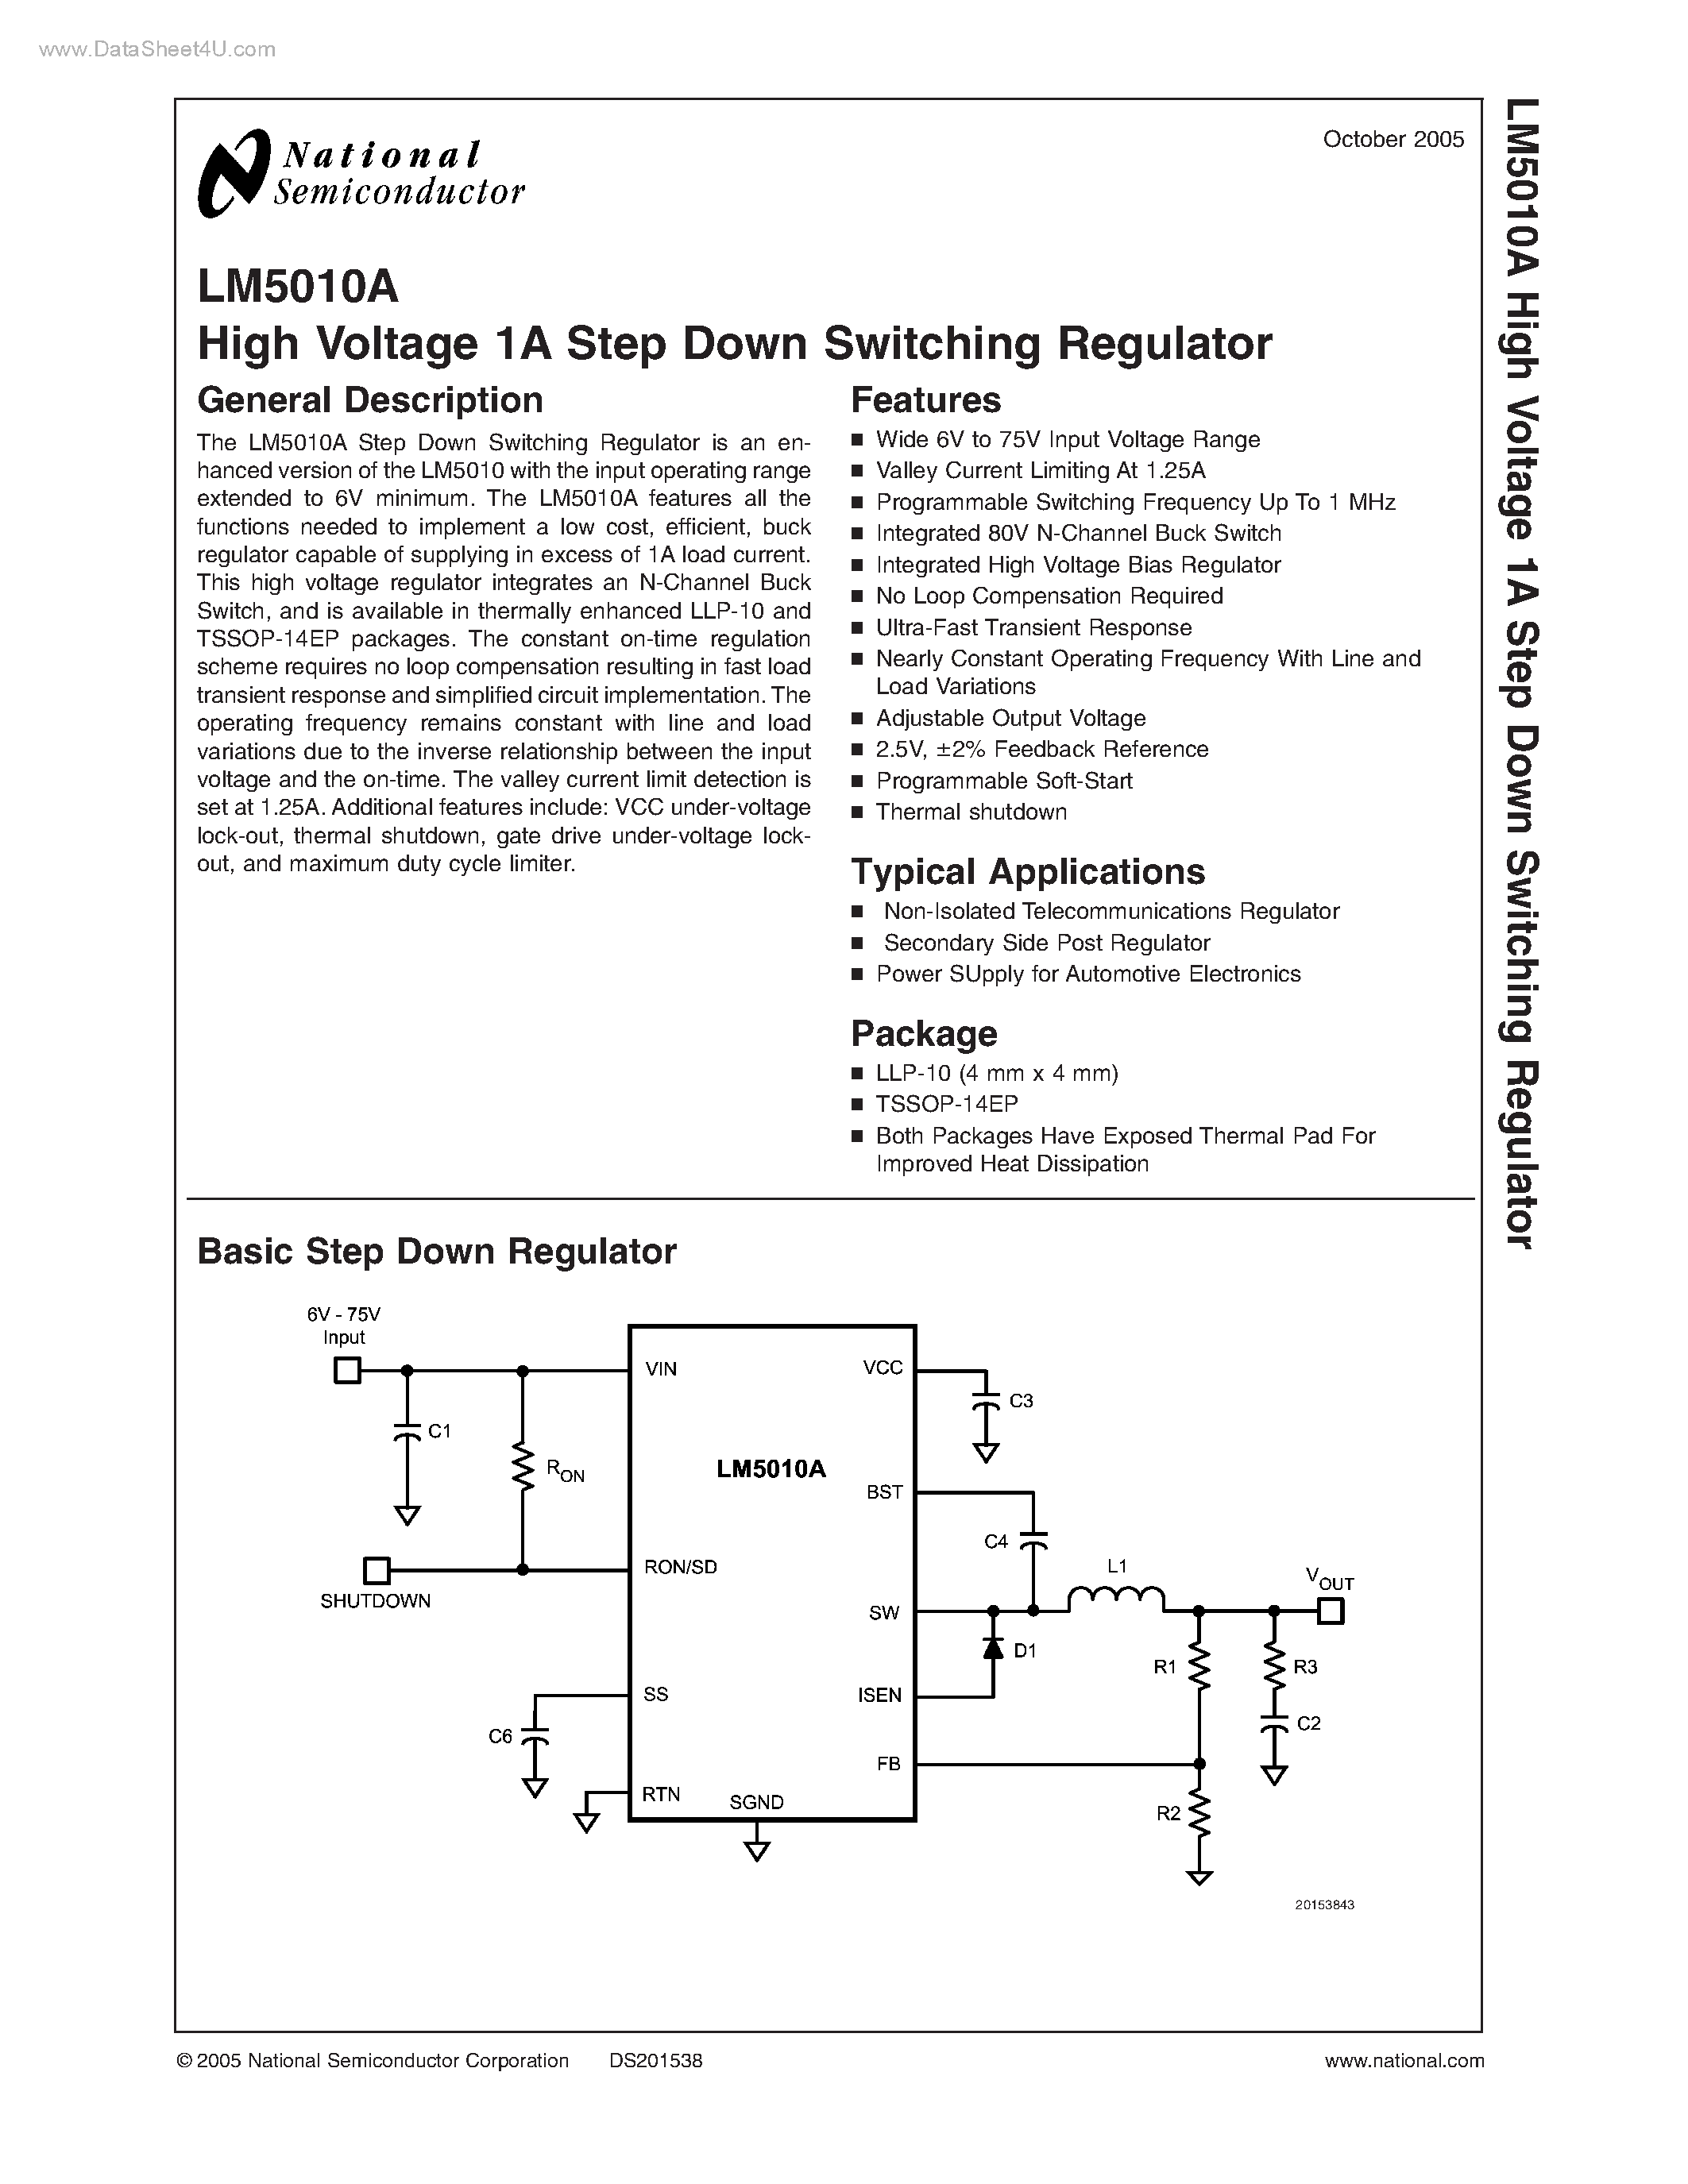 Datasheet LM5010A - High Voltage 1A Step Down Switching Regulator page 1